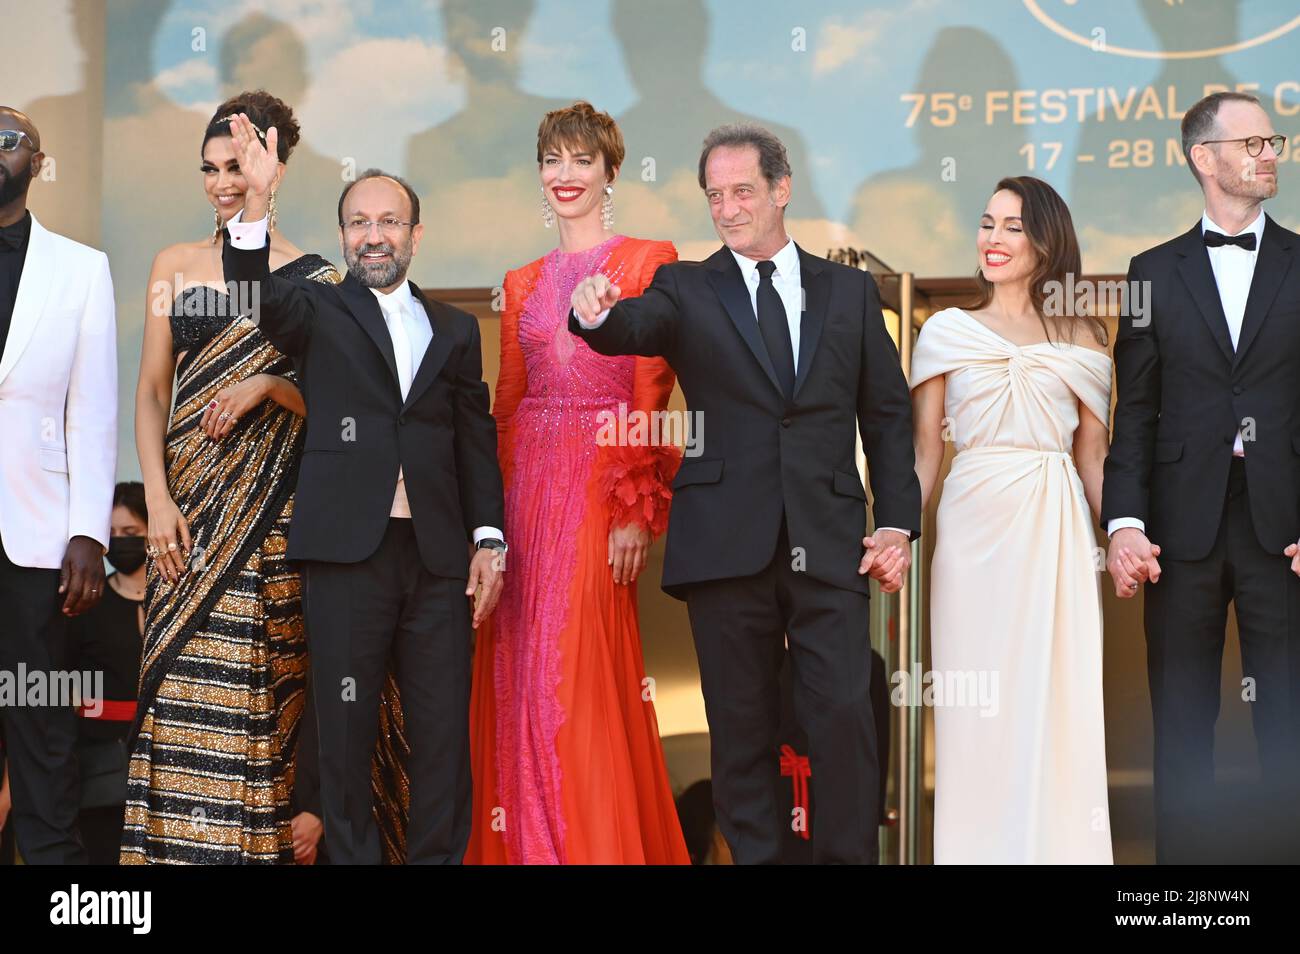 Cannes, France. 17th May, 2022. CANNES, FRANCE. May 17, 2022: Indian actress Deepika Padukone, Iranian film director Asghar Farhadi, British actress Rebecca Hall, French actor and Cannes jury president Vincent Lindon, Swedish actress Noomi Rapace & Norwegian film director Joachim Trier at the Premiere of Final Cut at the Gala Opening of the 75th Festival de Cannes. Picture Credit: Paul Smith/Alamy Live News Stock Photo